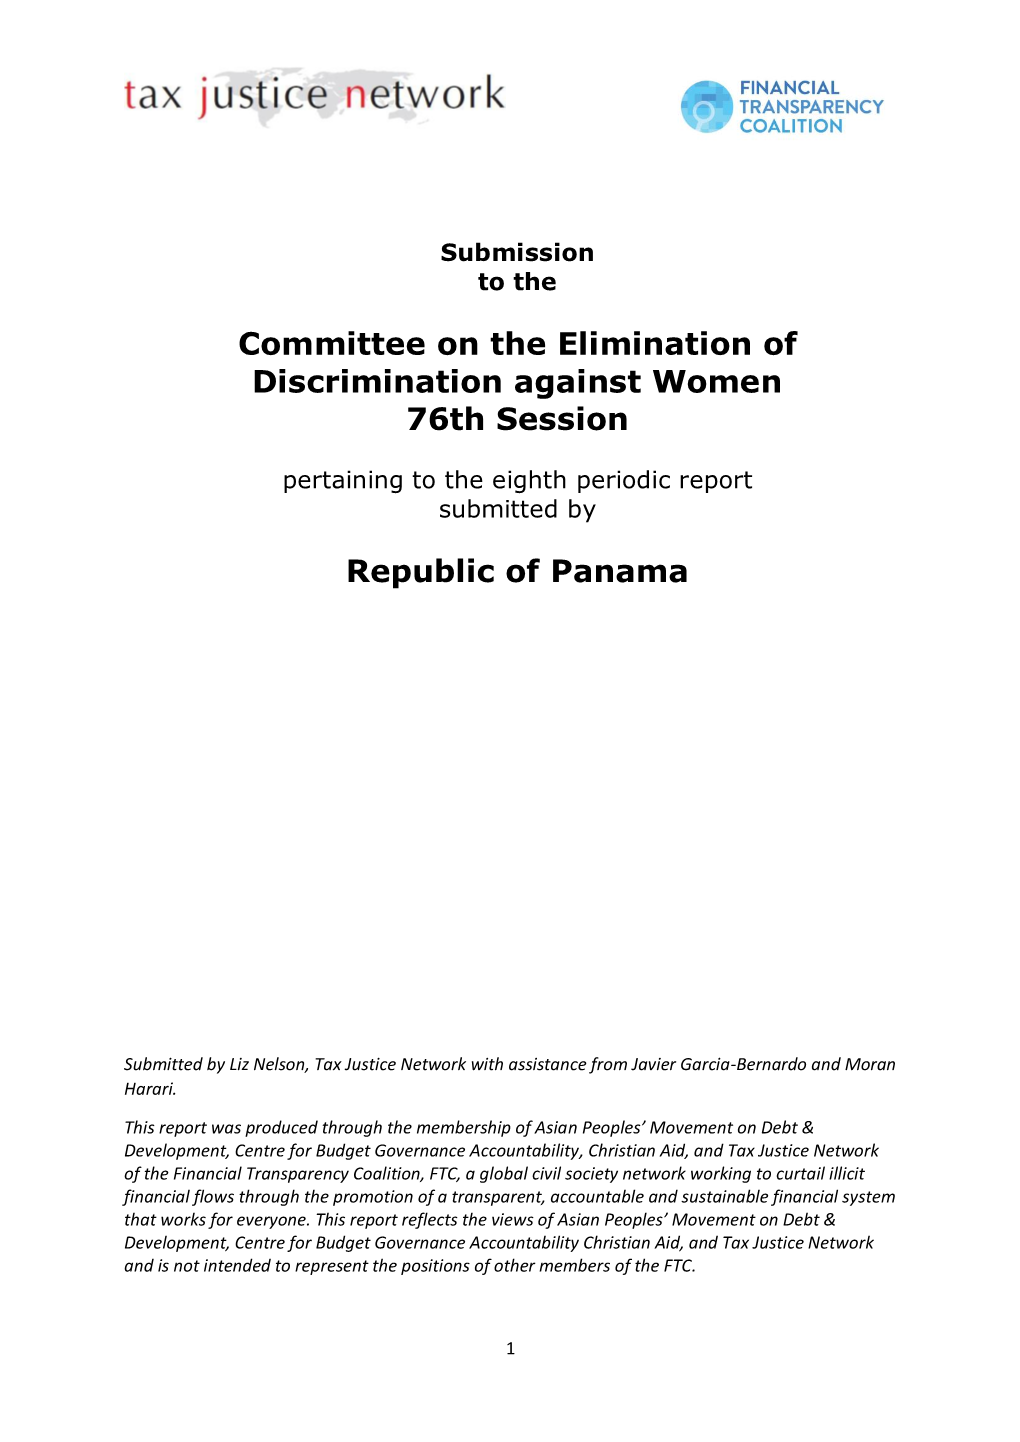 Committee on the Elimination of Discrimination Against Women 76Th Session